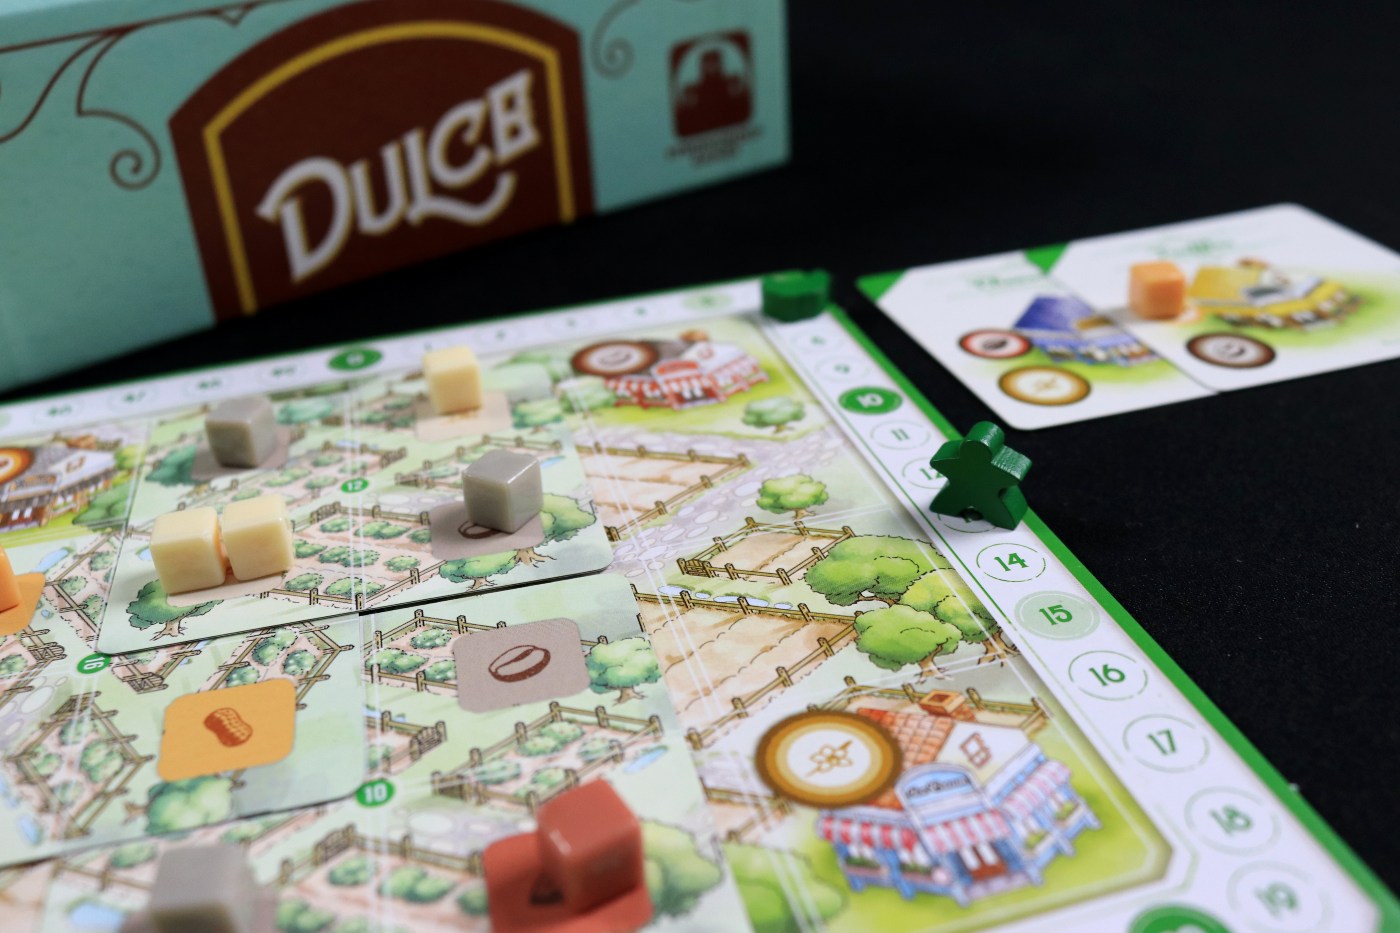 Dulce player boards